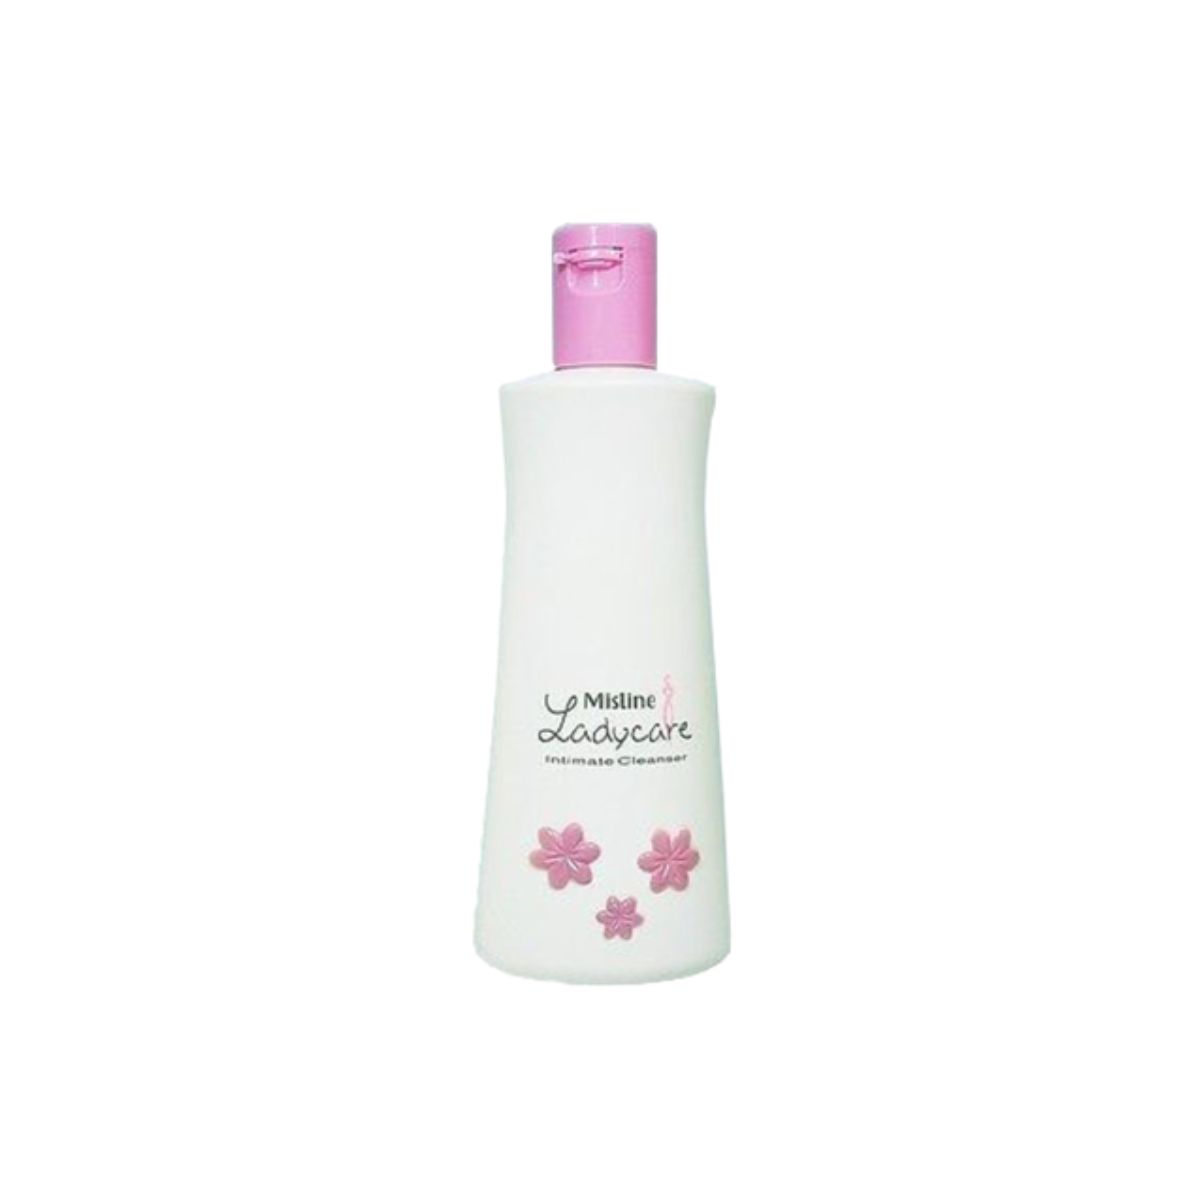 Mistine Lady Care Intimate Cleanser - 200ml - Pink